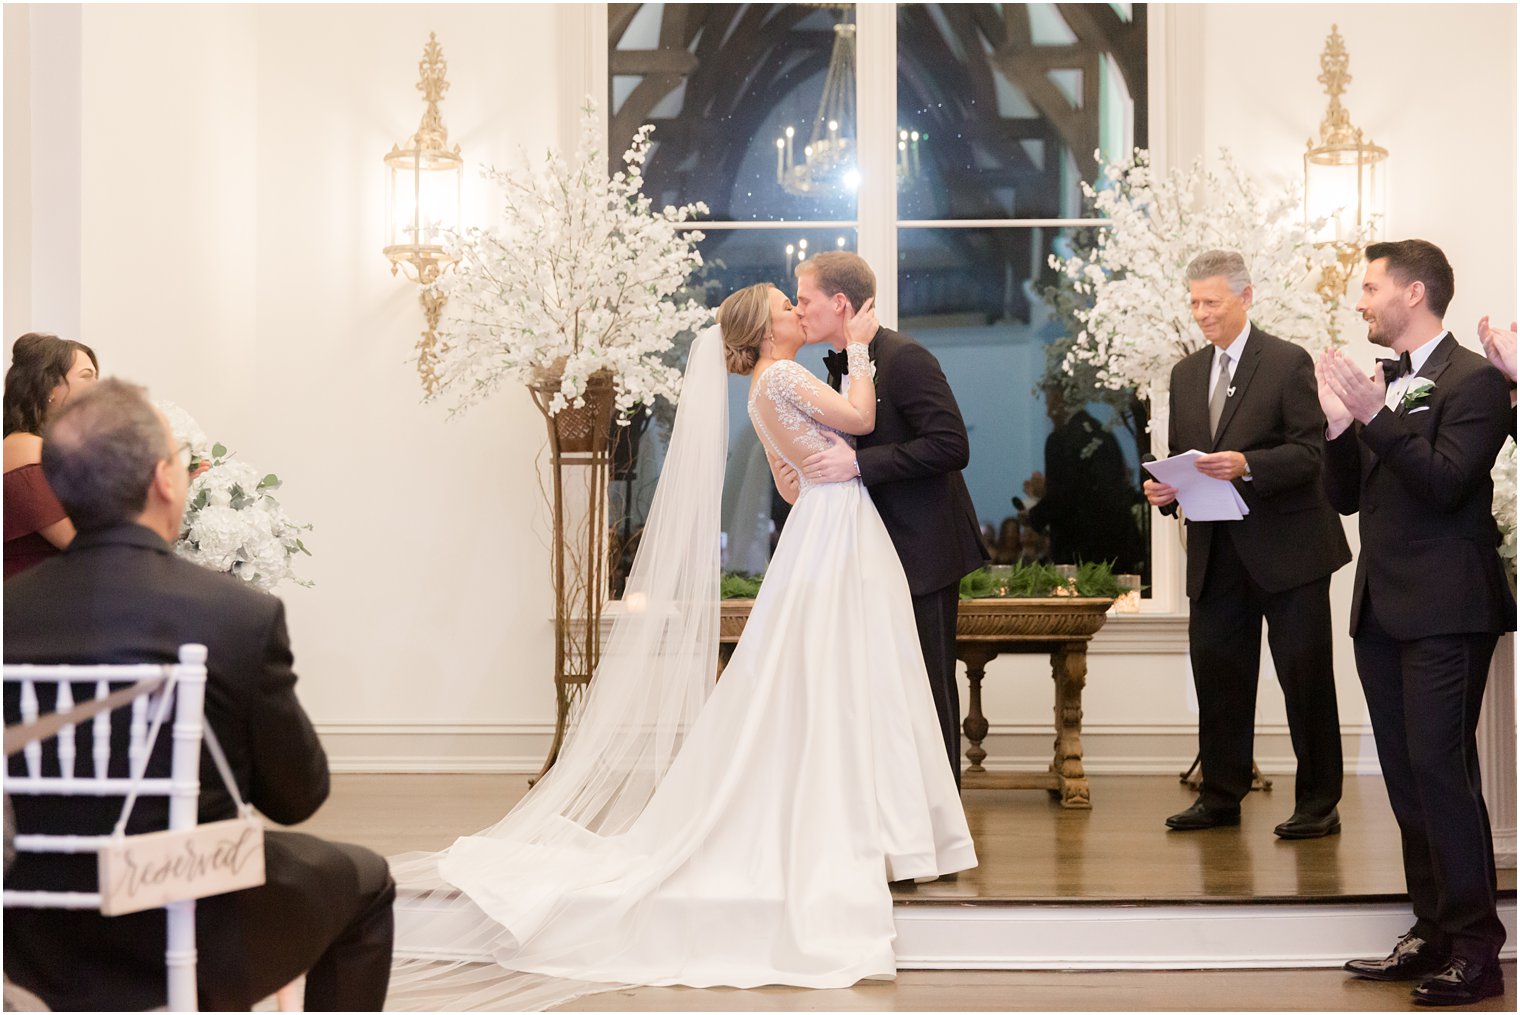 Bride and groom kissing during wedding ceremony at Park Chateau Chapel| Winter wedding by Idalia Photography Associates